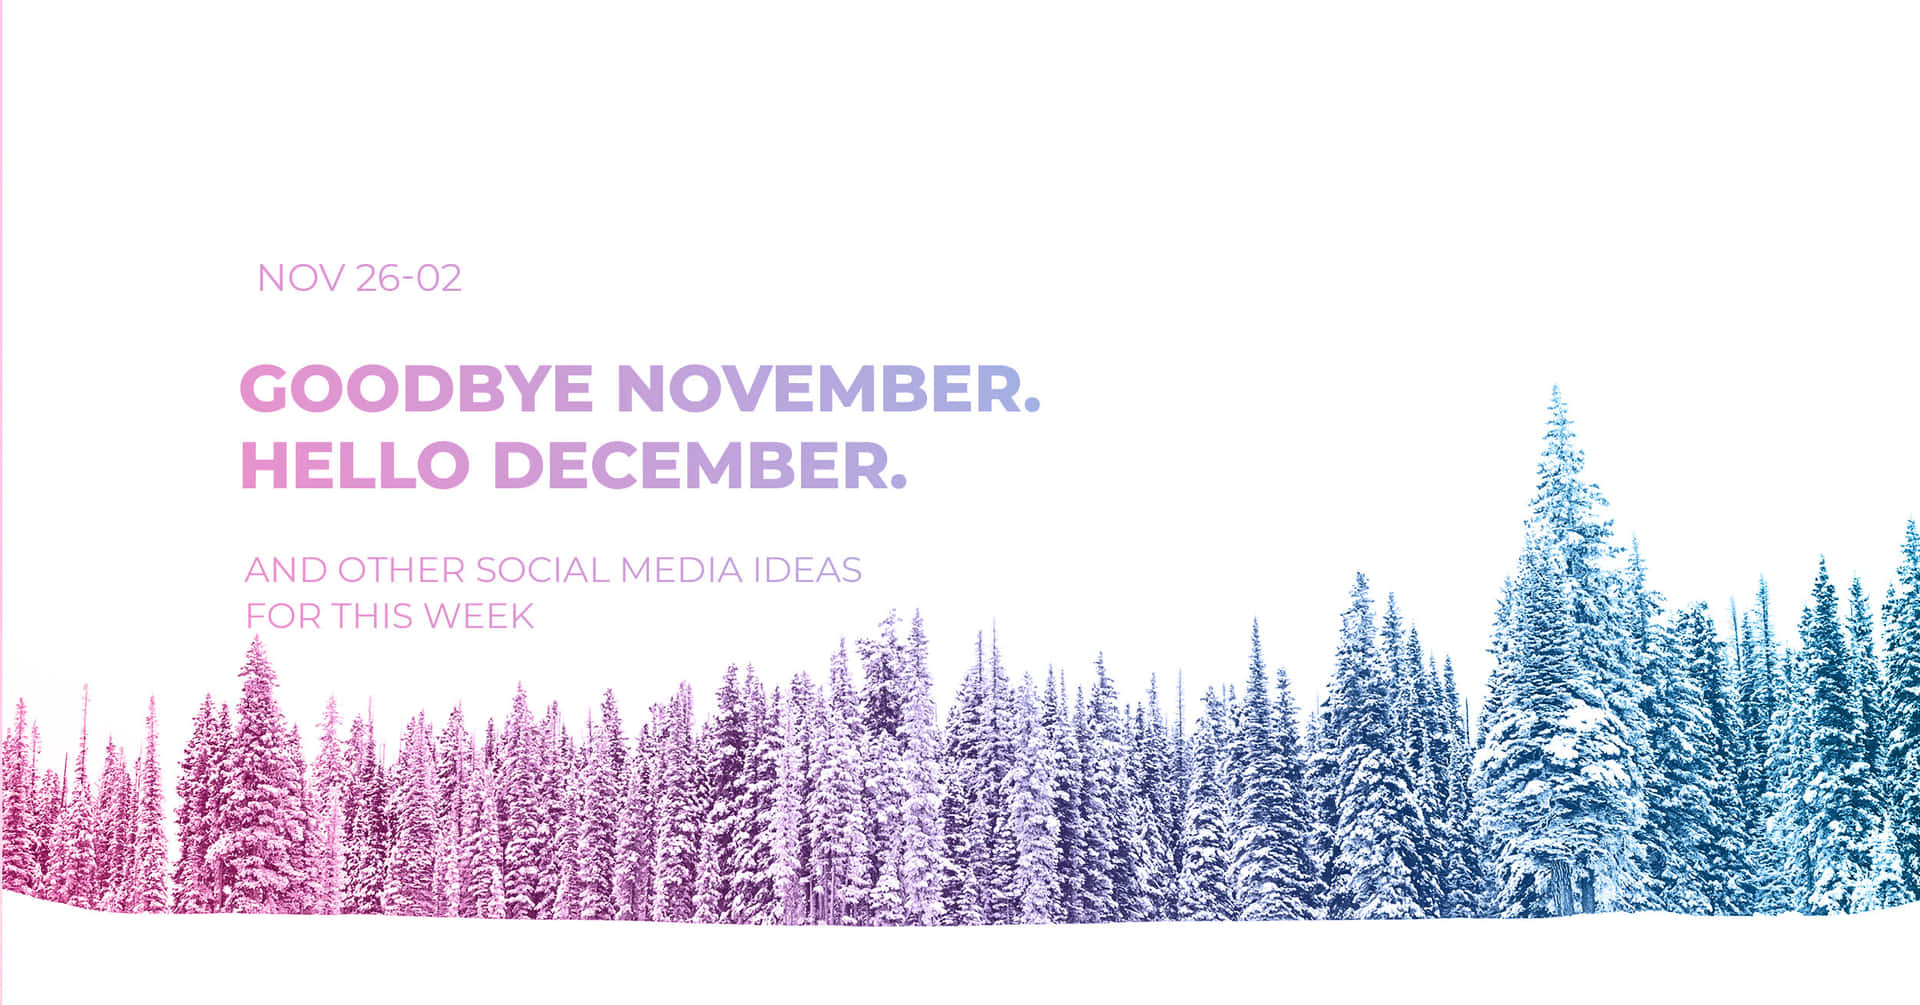 Our journey through November is complete, and here comes December! Wallpaper